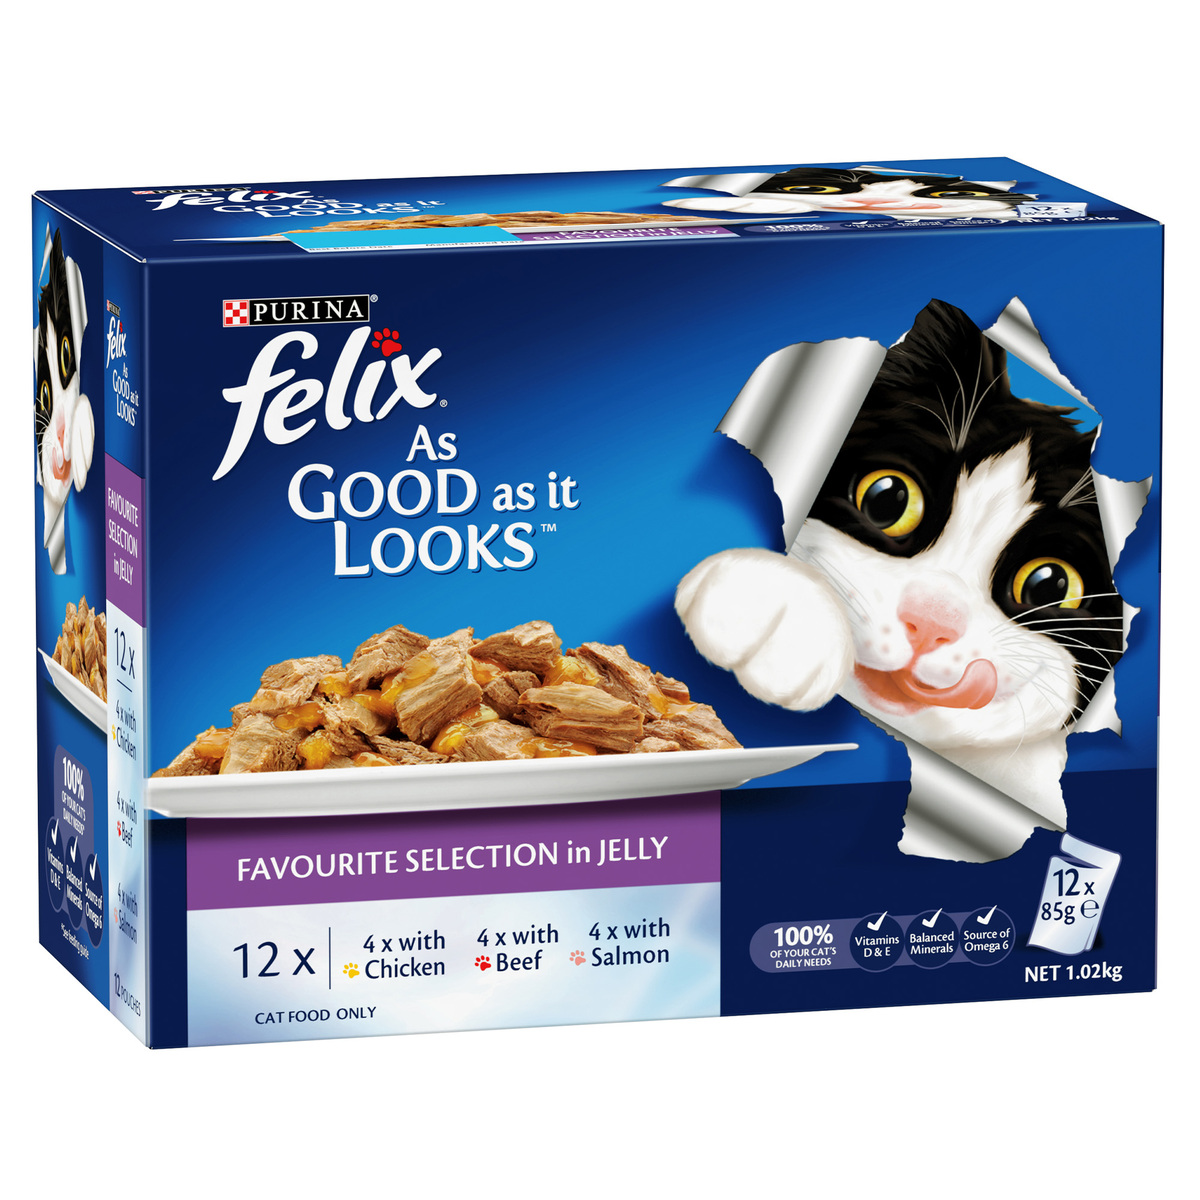 Purina Felix As Good As It Looks Delicious Favorite Selections In Jelly Cat Food ( Chicken, Beef & Salmon ) 12 x 85 g